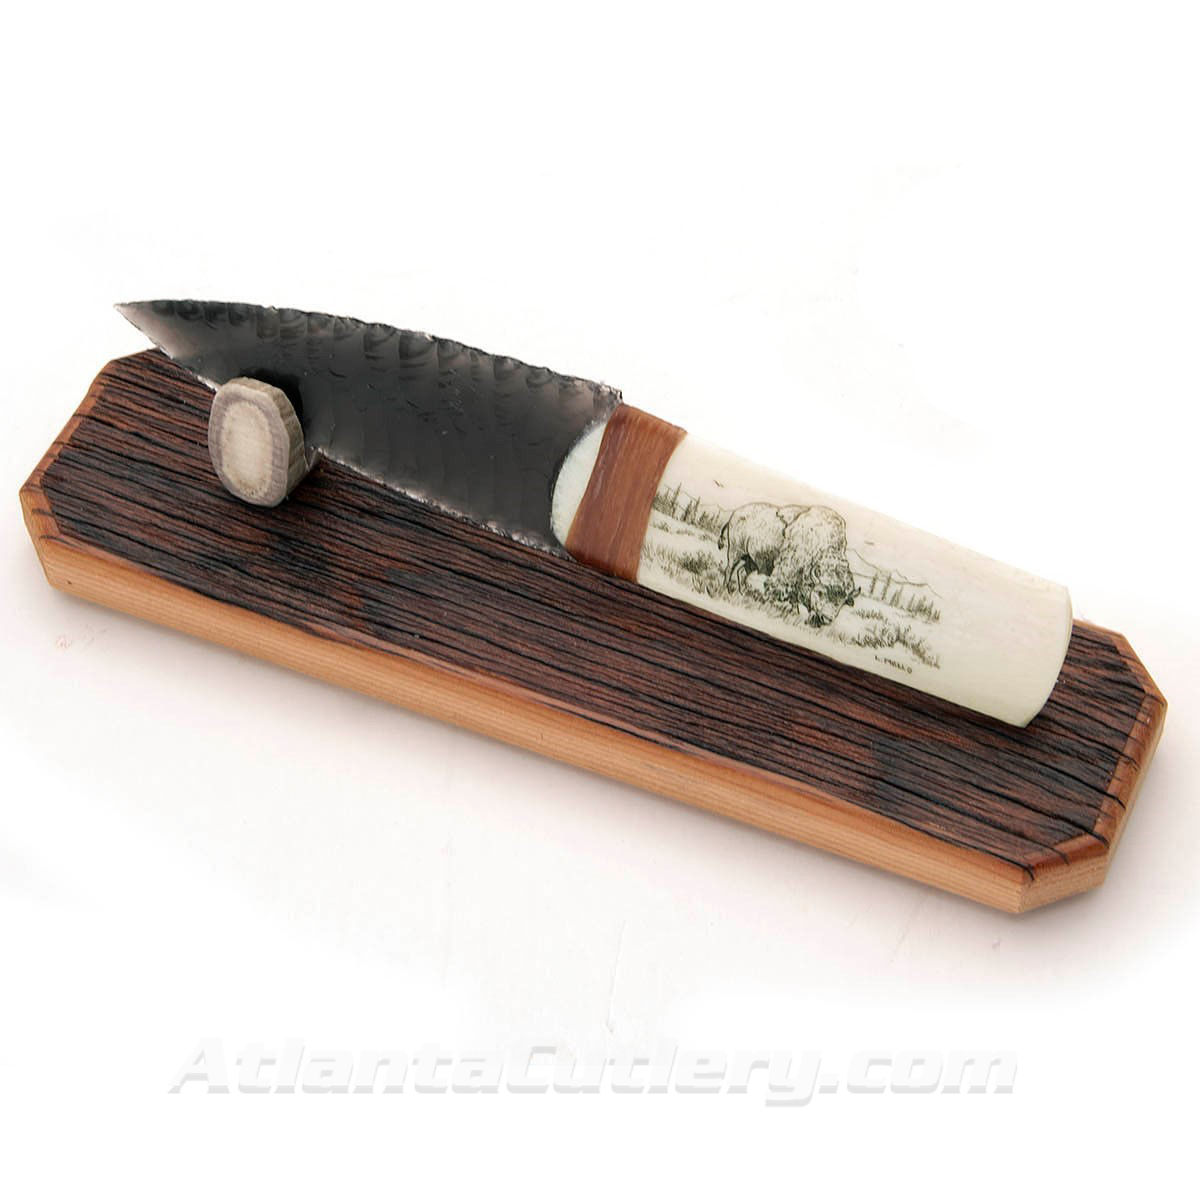 Buffalo Bone Obsidian Knife with Hand Carved Stand